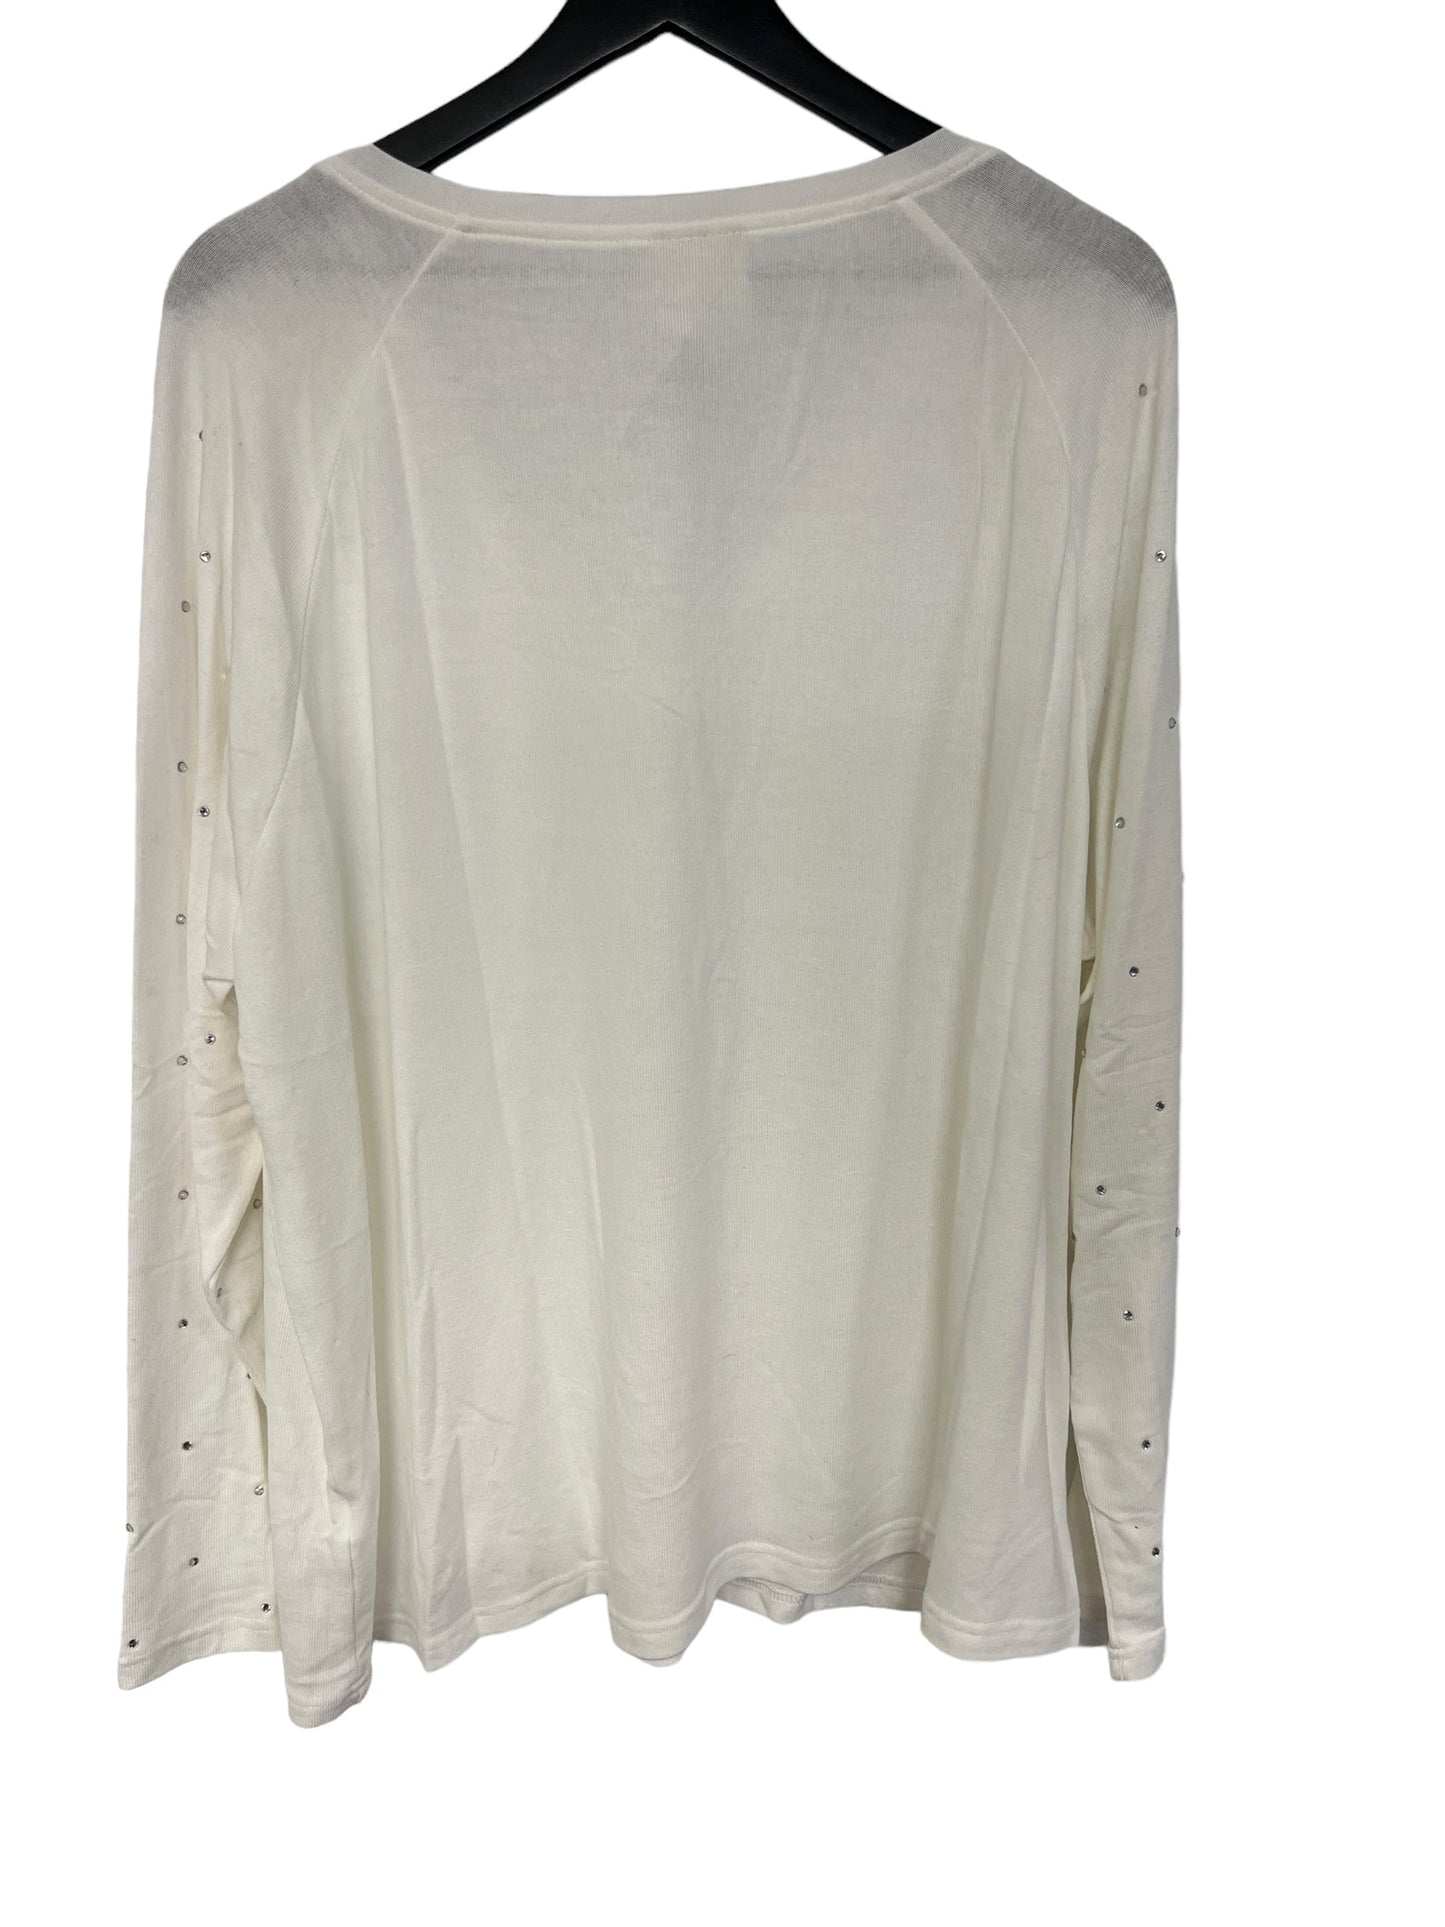 White Top Long Sleeve Vocal, Size 3x